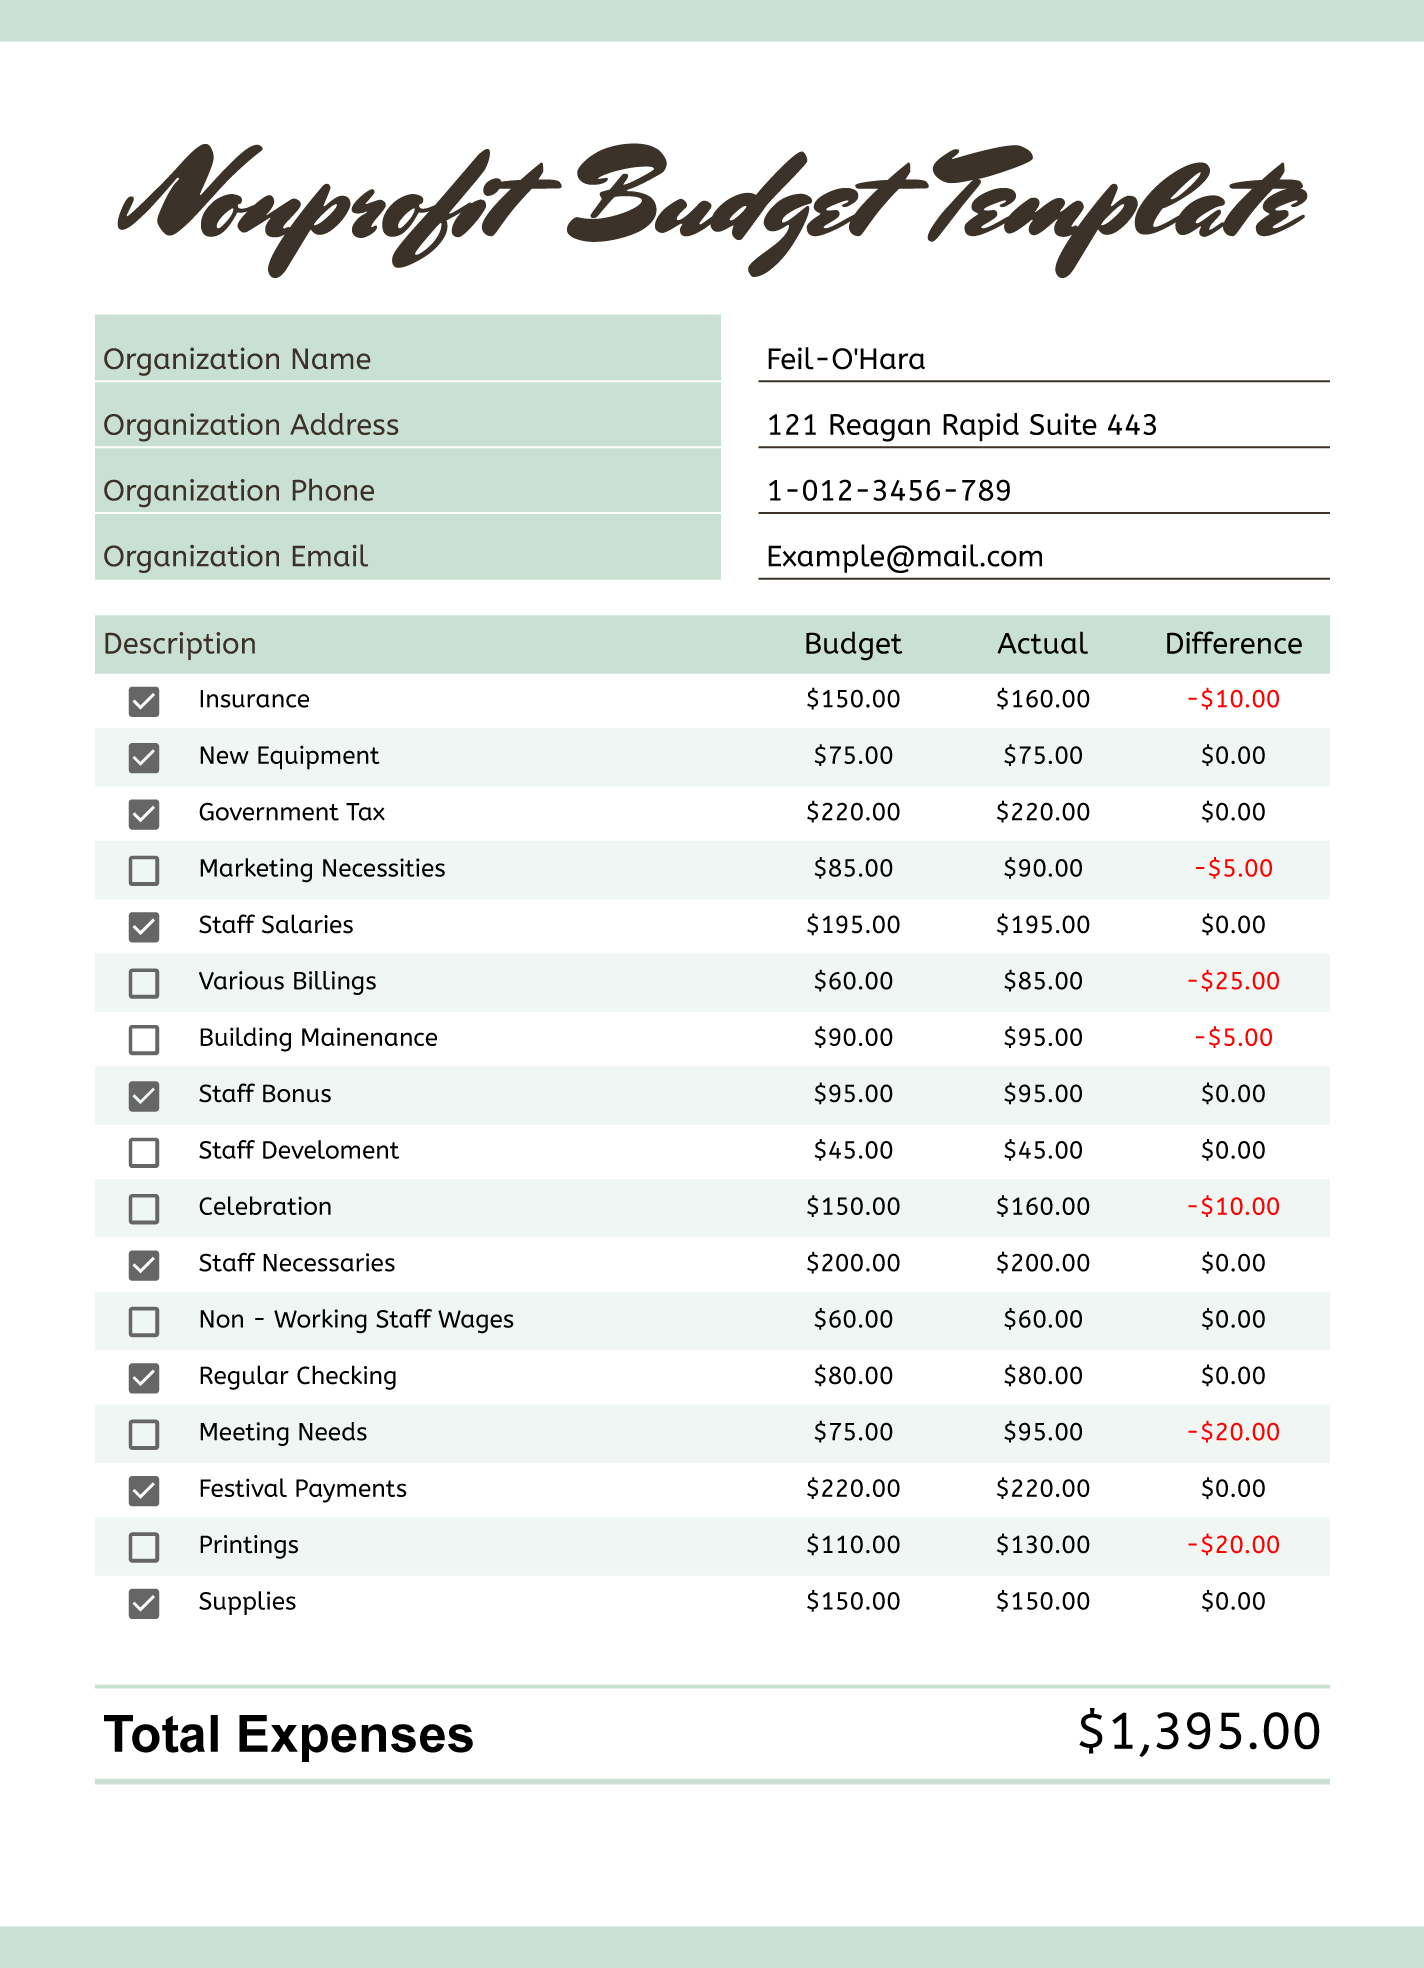 view-12-get-small-business-budget-template-google-sheets-pics-jpg